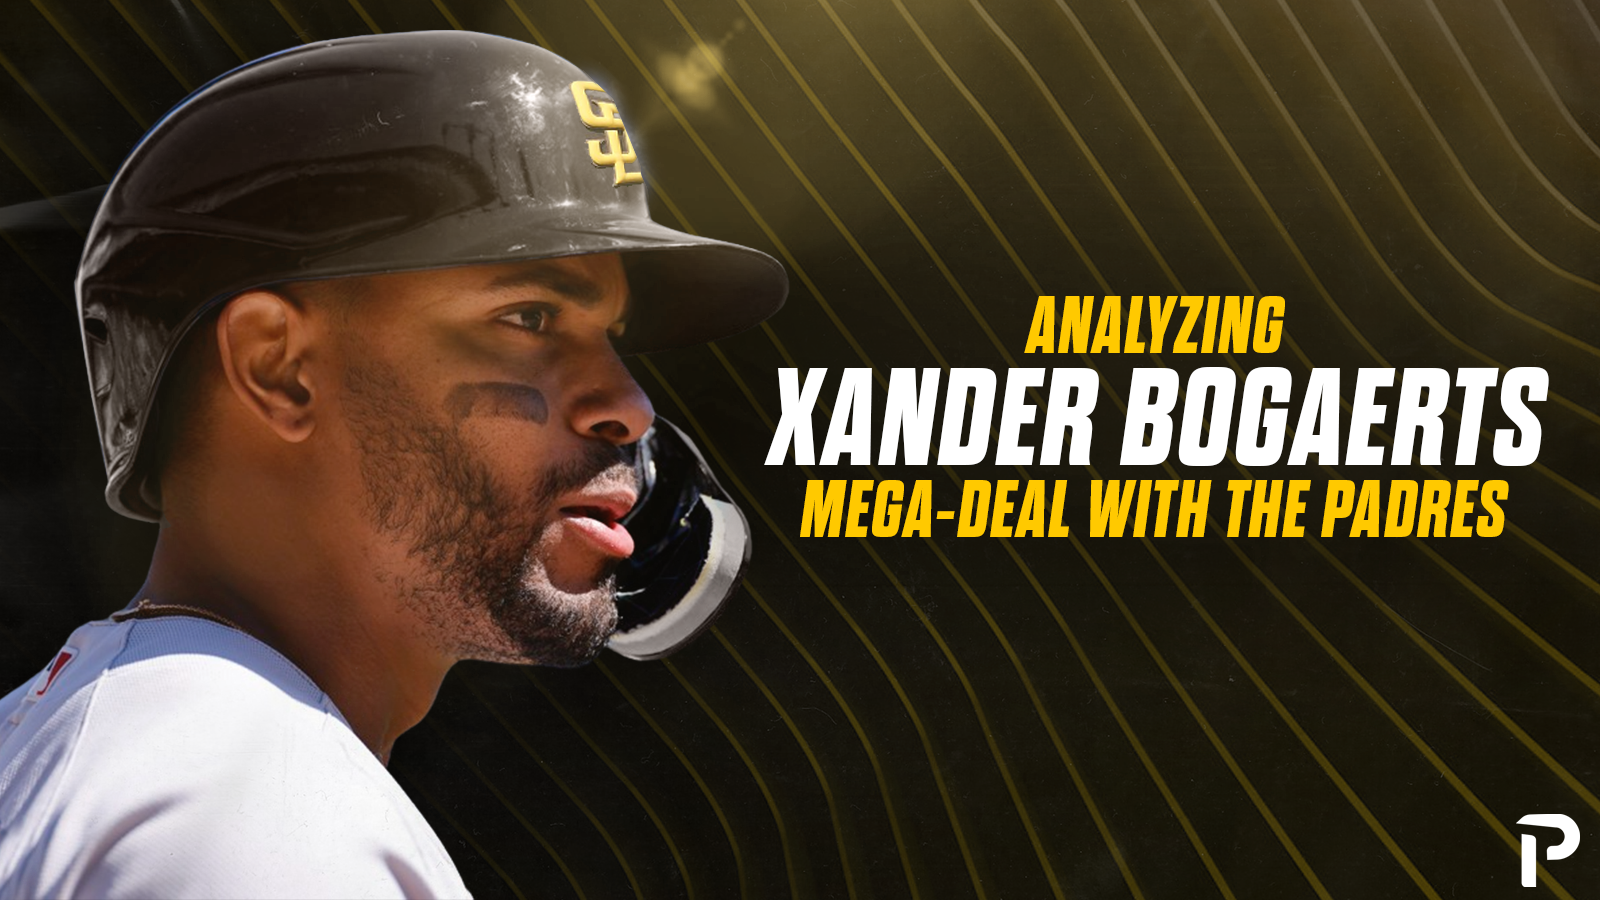 Analyzing Xander Bogaerts' Mega-Deal with the Padres